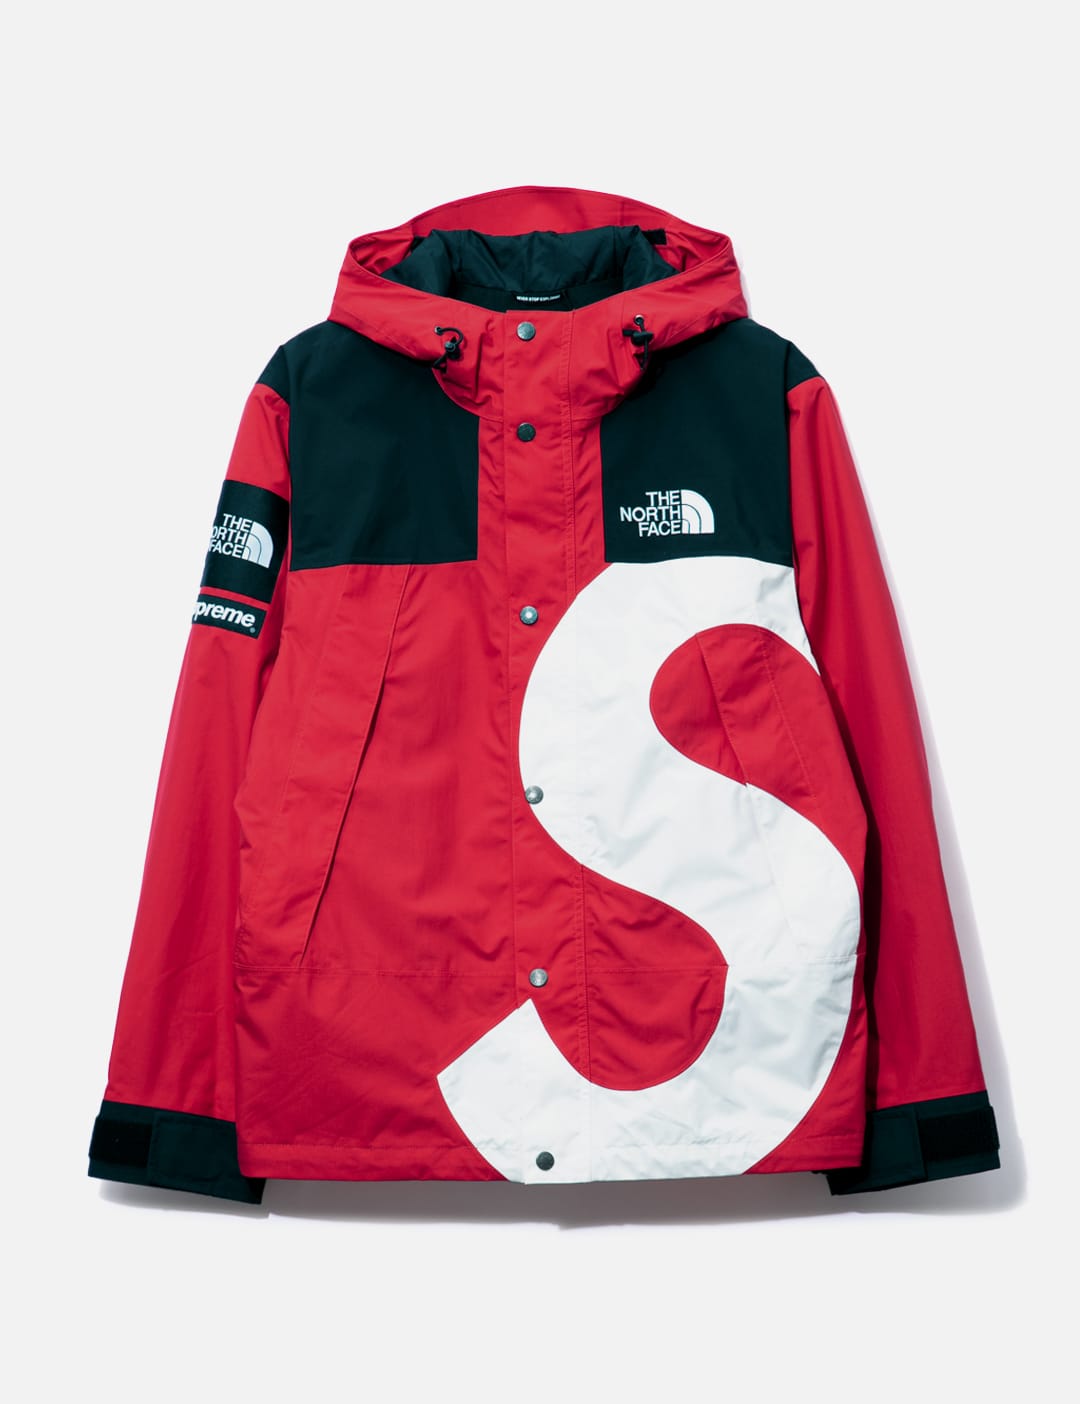 supreme north face | www.myglobaltax.com